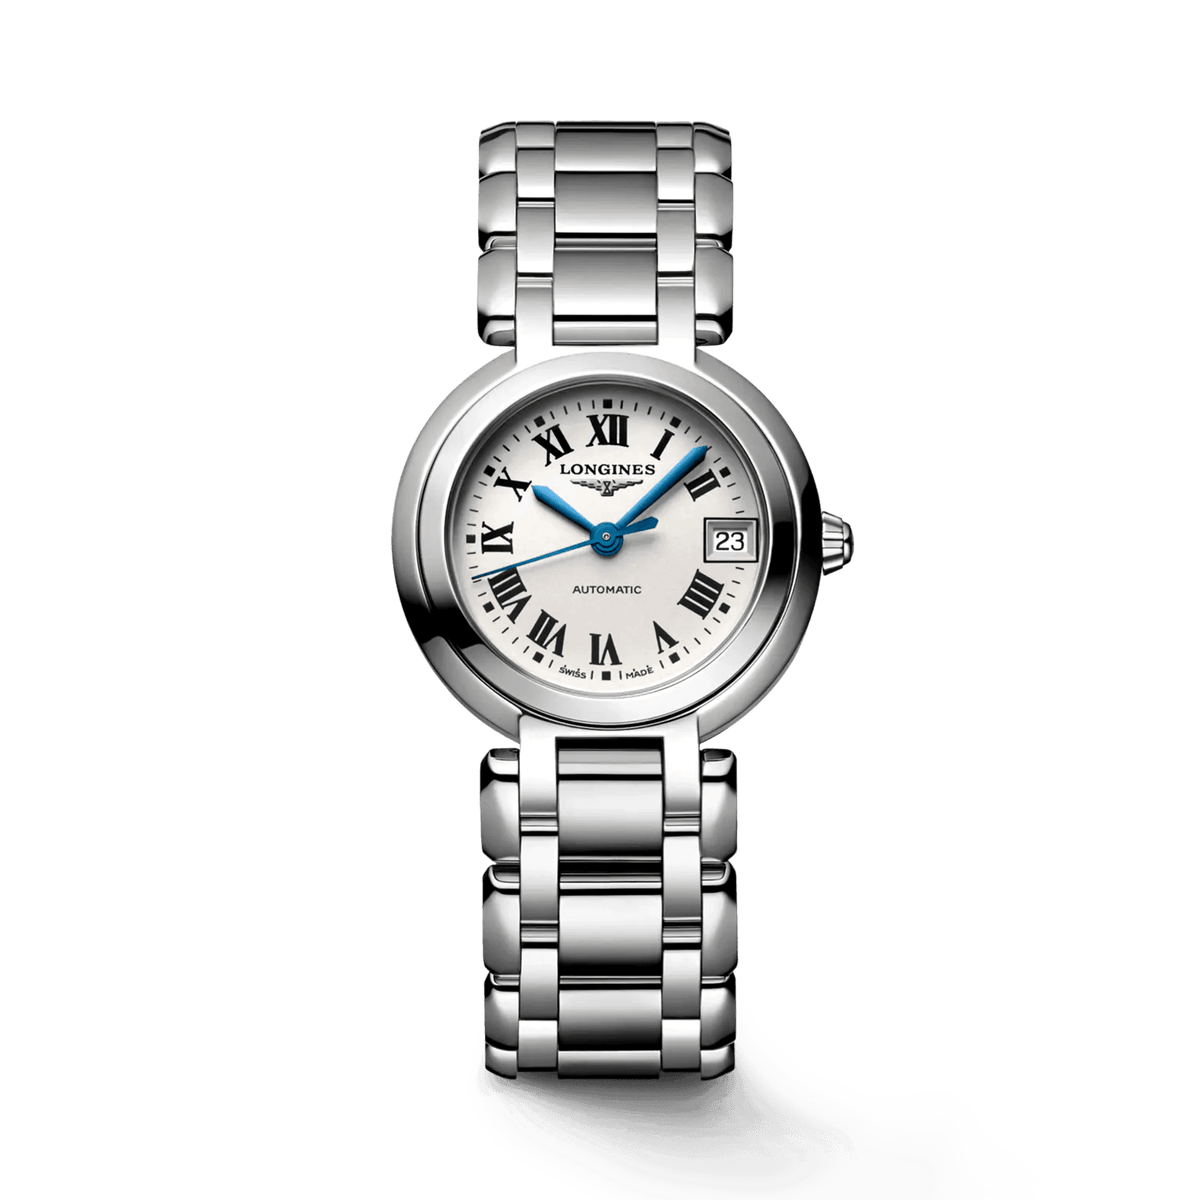 Longines PrimaLuna Women's 26.5mm Stainless Steel Automatic Watch L8.111.4.71.6 - Wallace Bishop